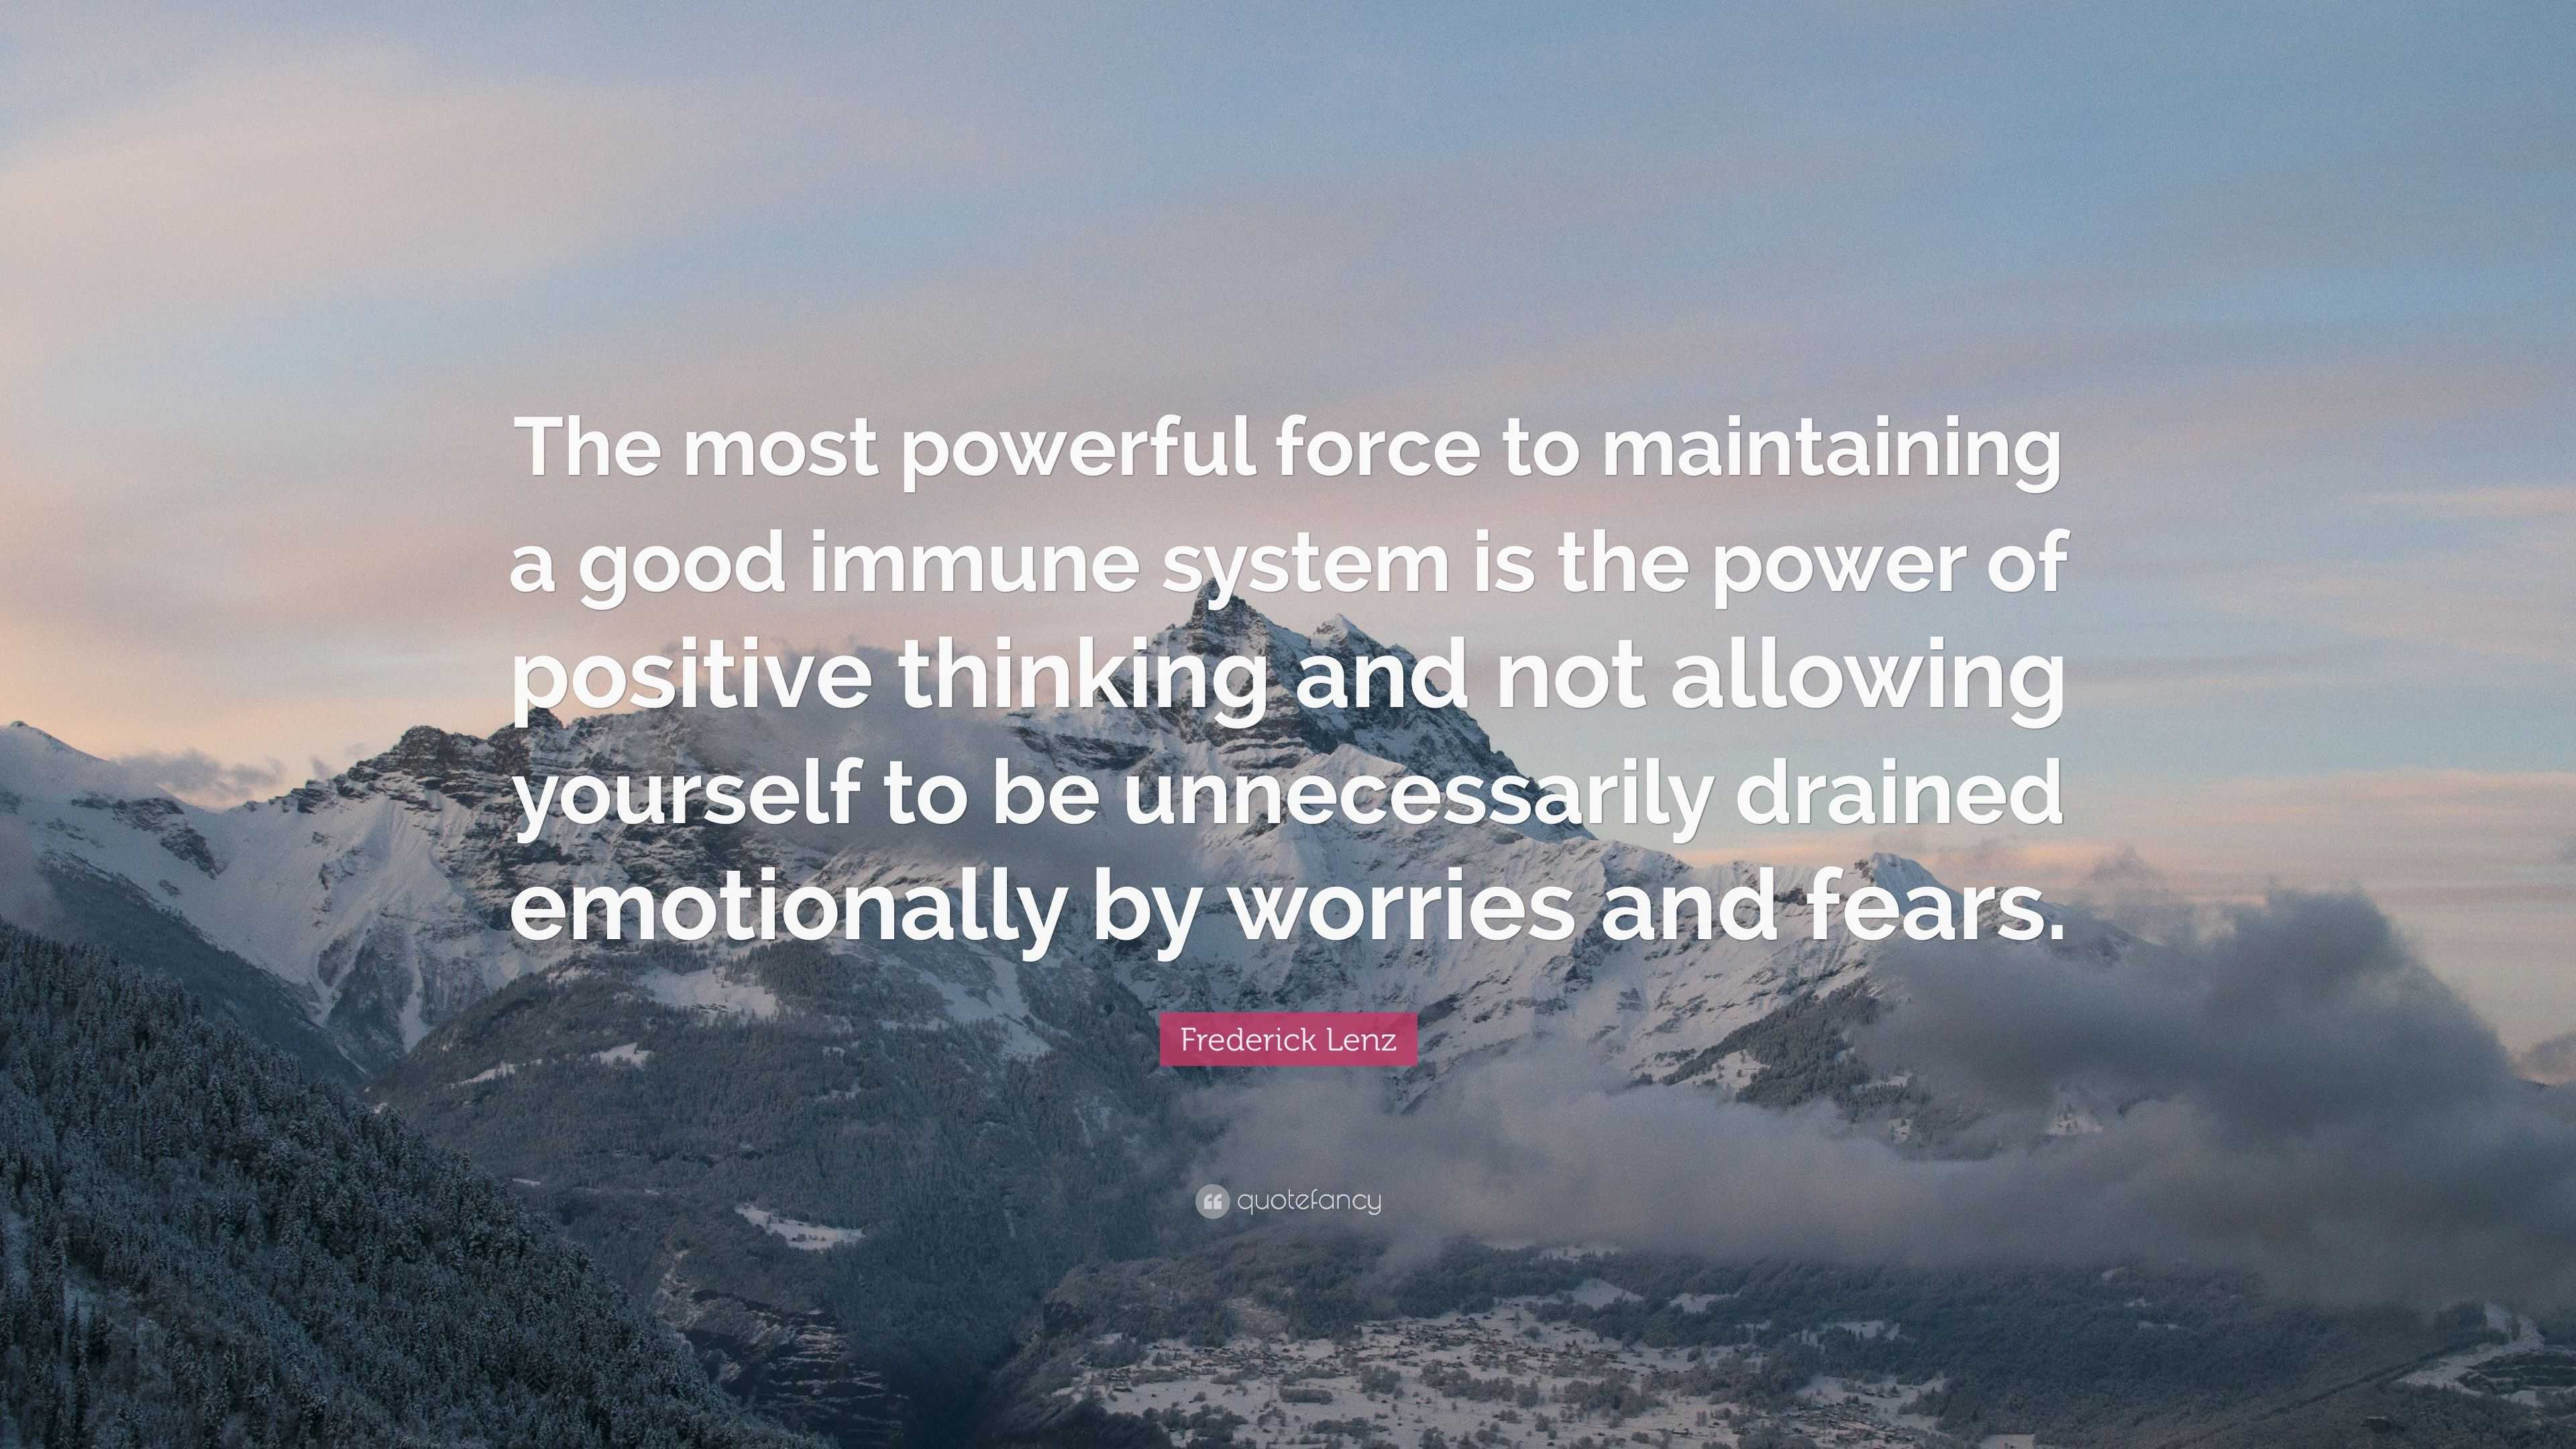 Frederick Lenz Quote: “The most powerful force to maintaining a good ...